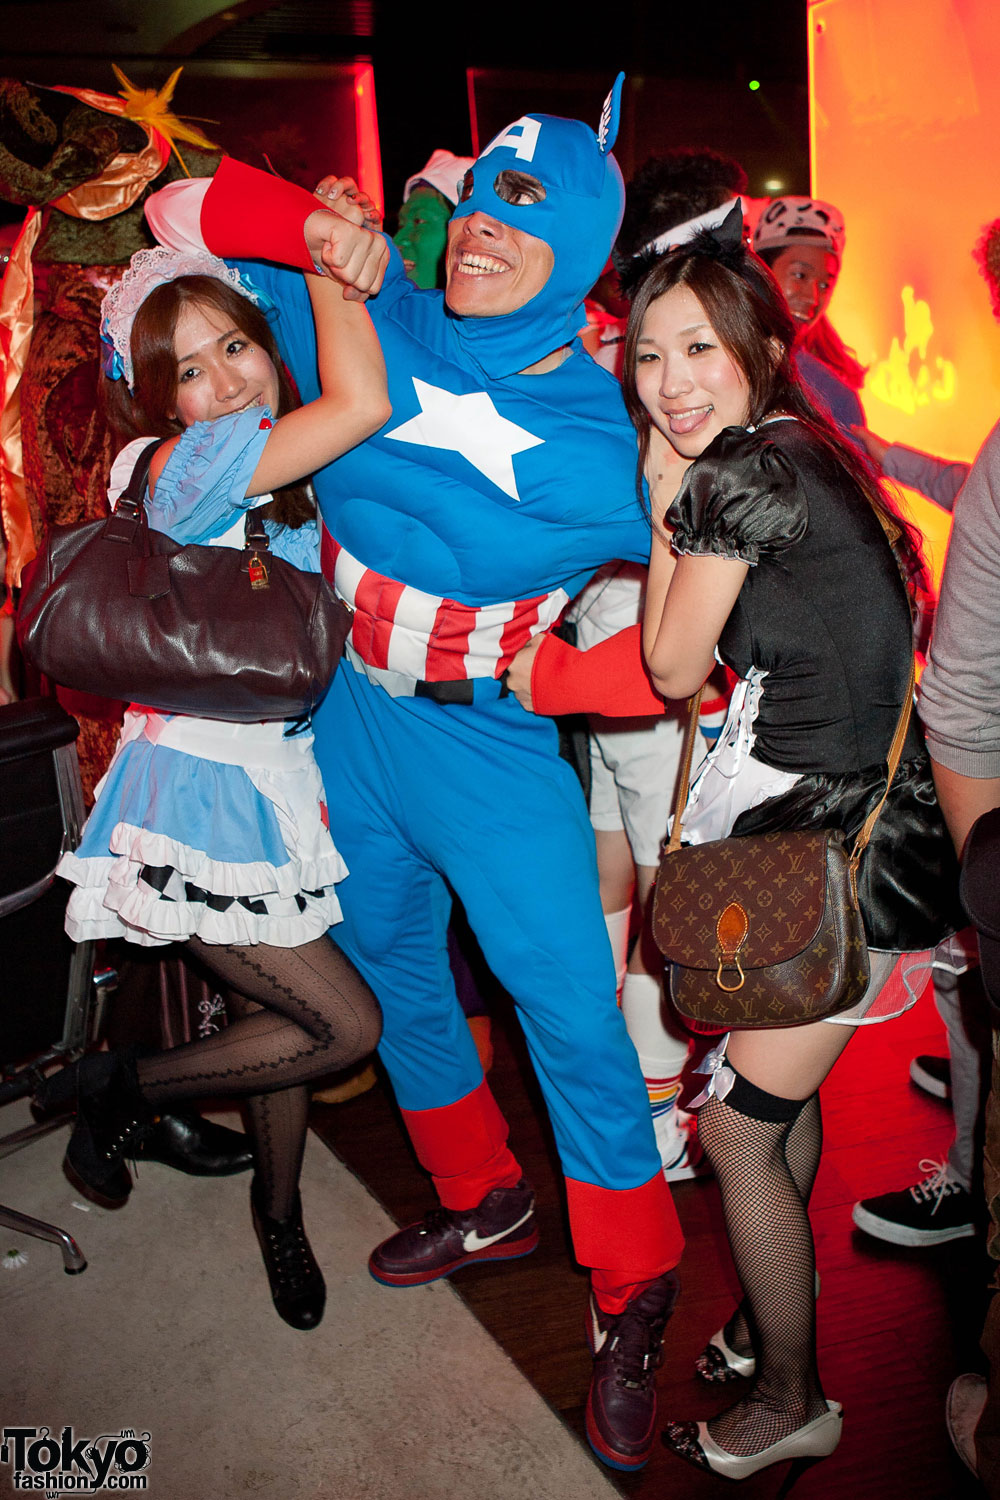 http://tokyofashion.com/wp-content/uploads/2011/11/Tokyo-Halloween-American-Apparel-Afterparty-2011-056.jpg